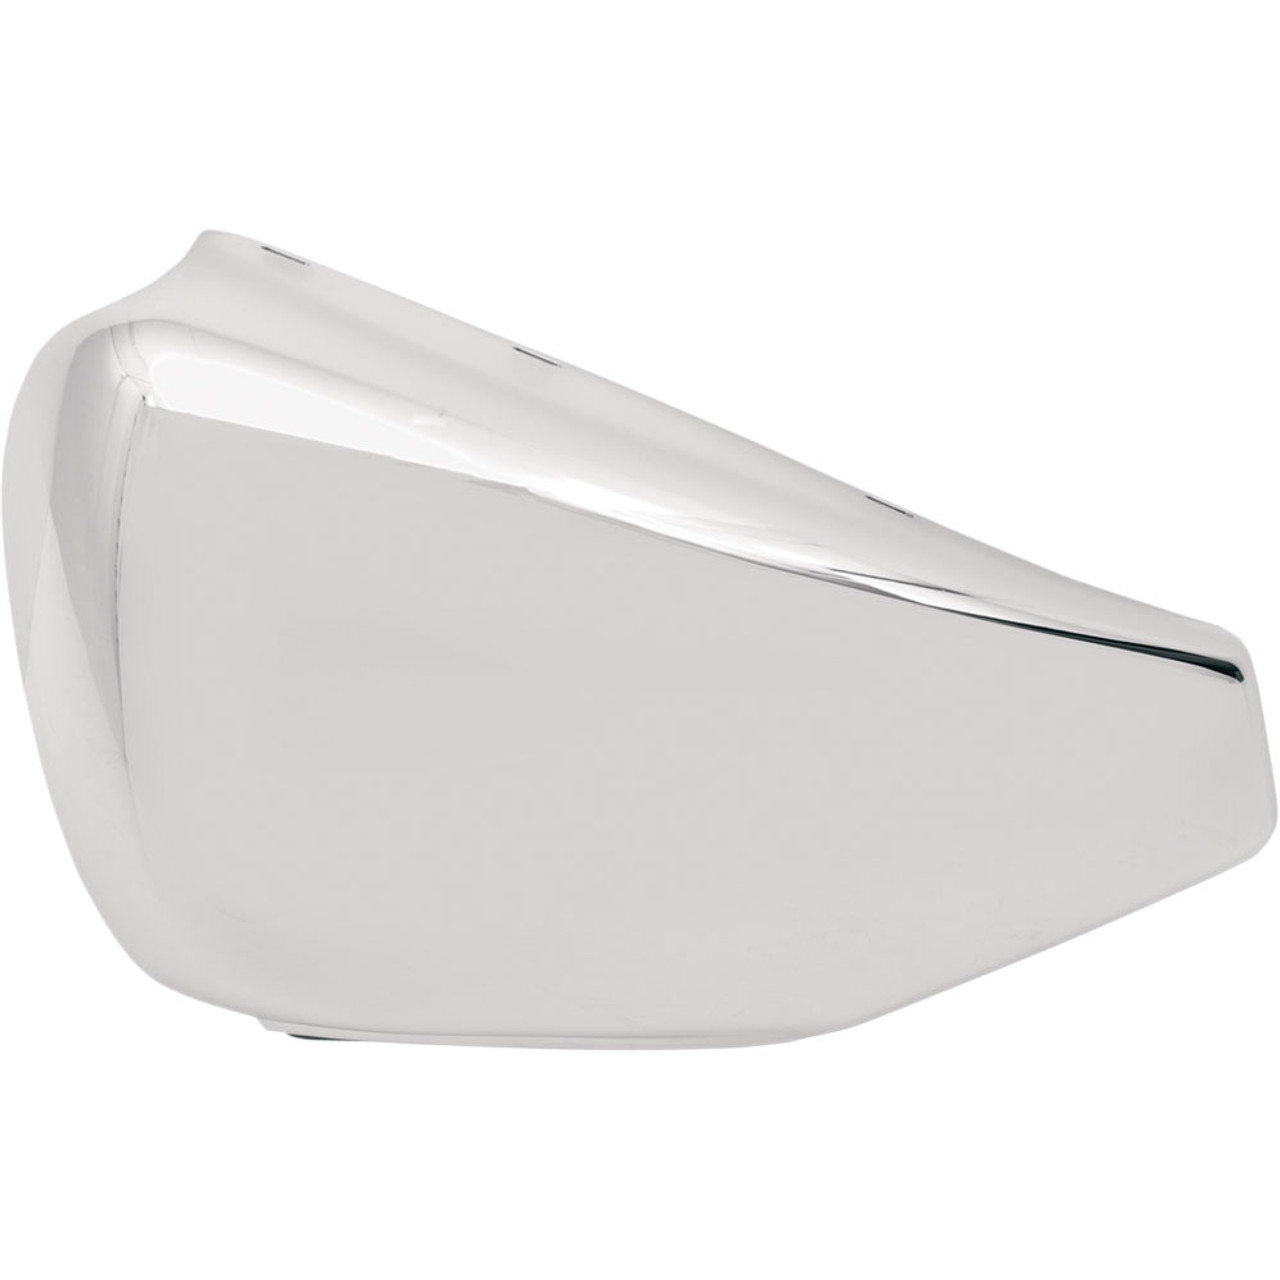 Sidecarrier permanent mounted chrome for Honda CBX 1000 (1978-1980)